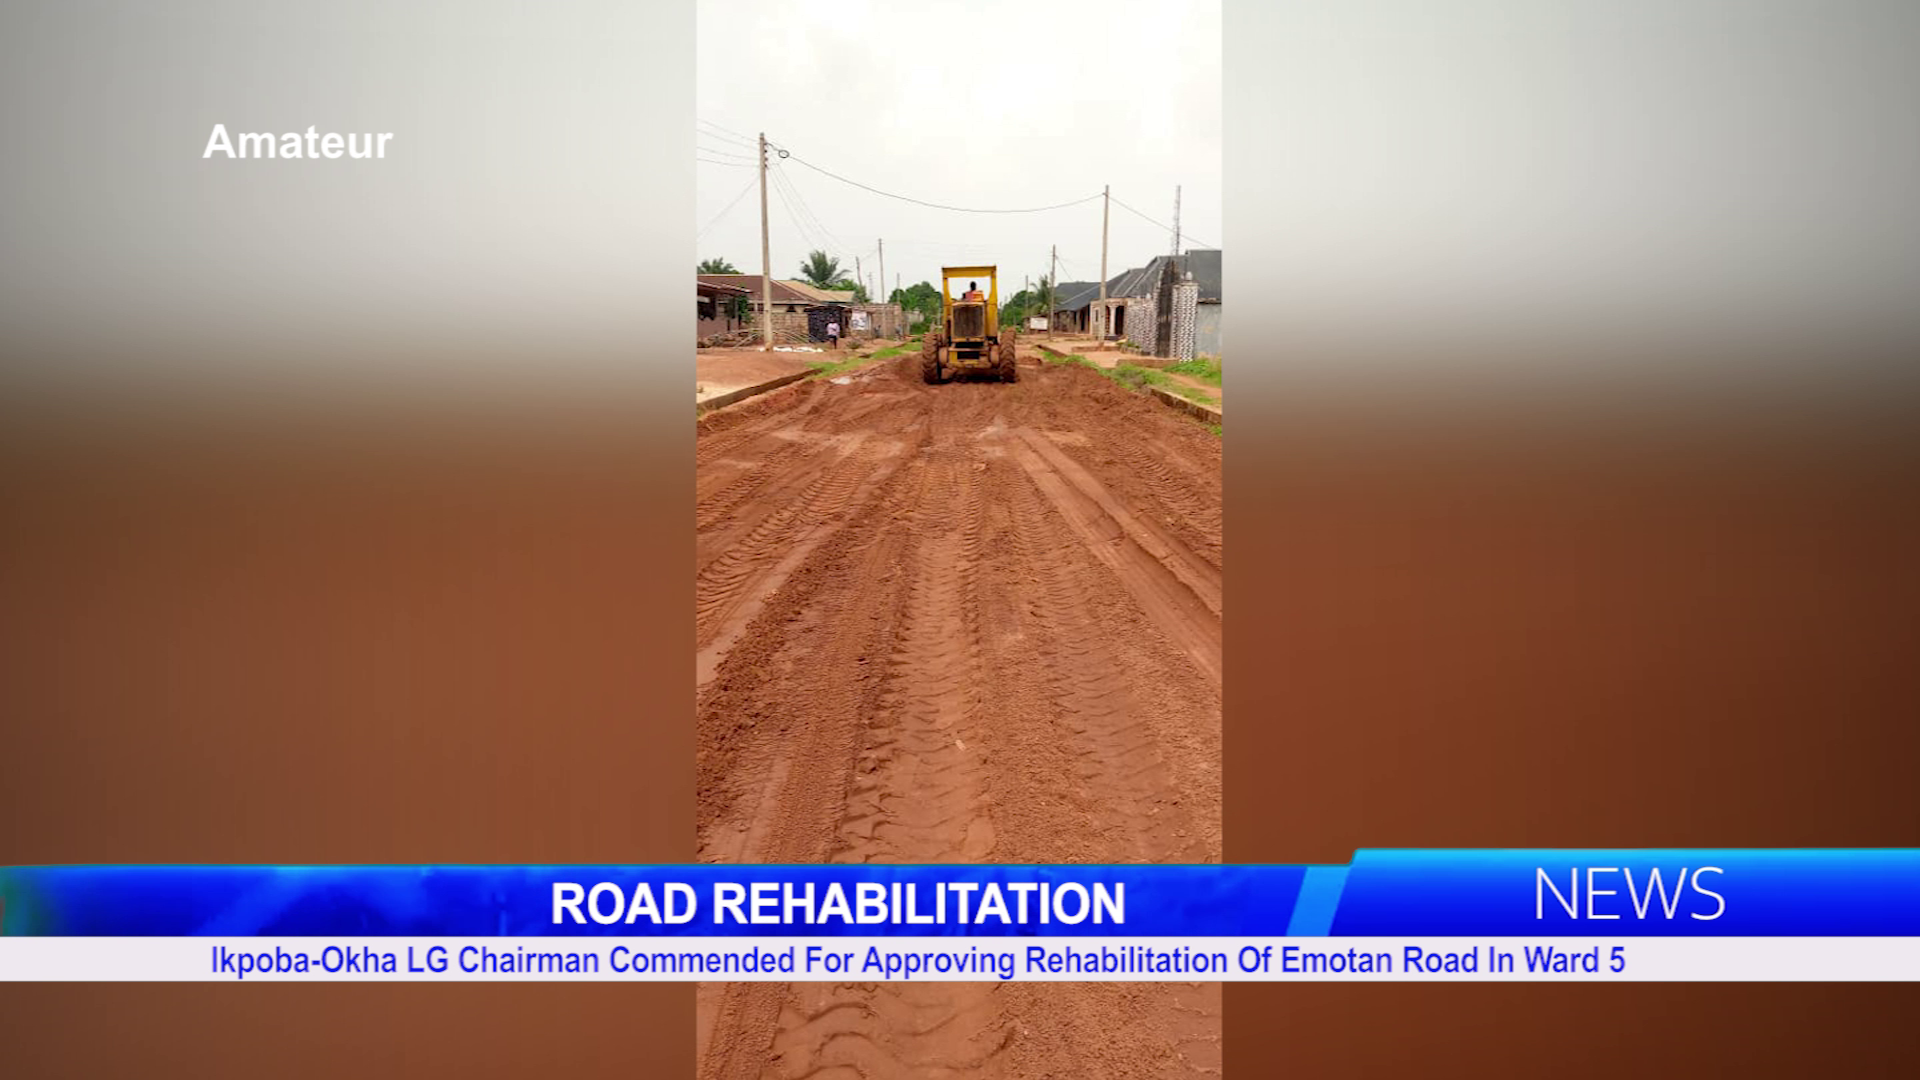 Ikpoba-Okha LG Chairman Commended For Approving Rehabilitation Of Emotan Road In Ward 5